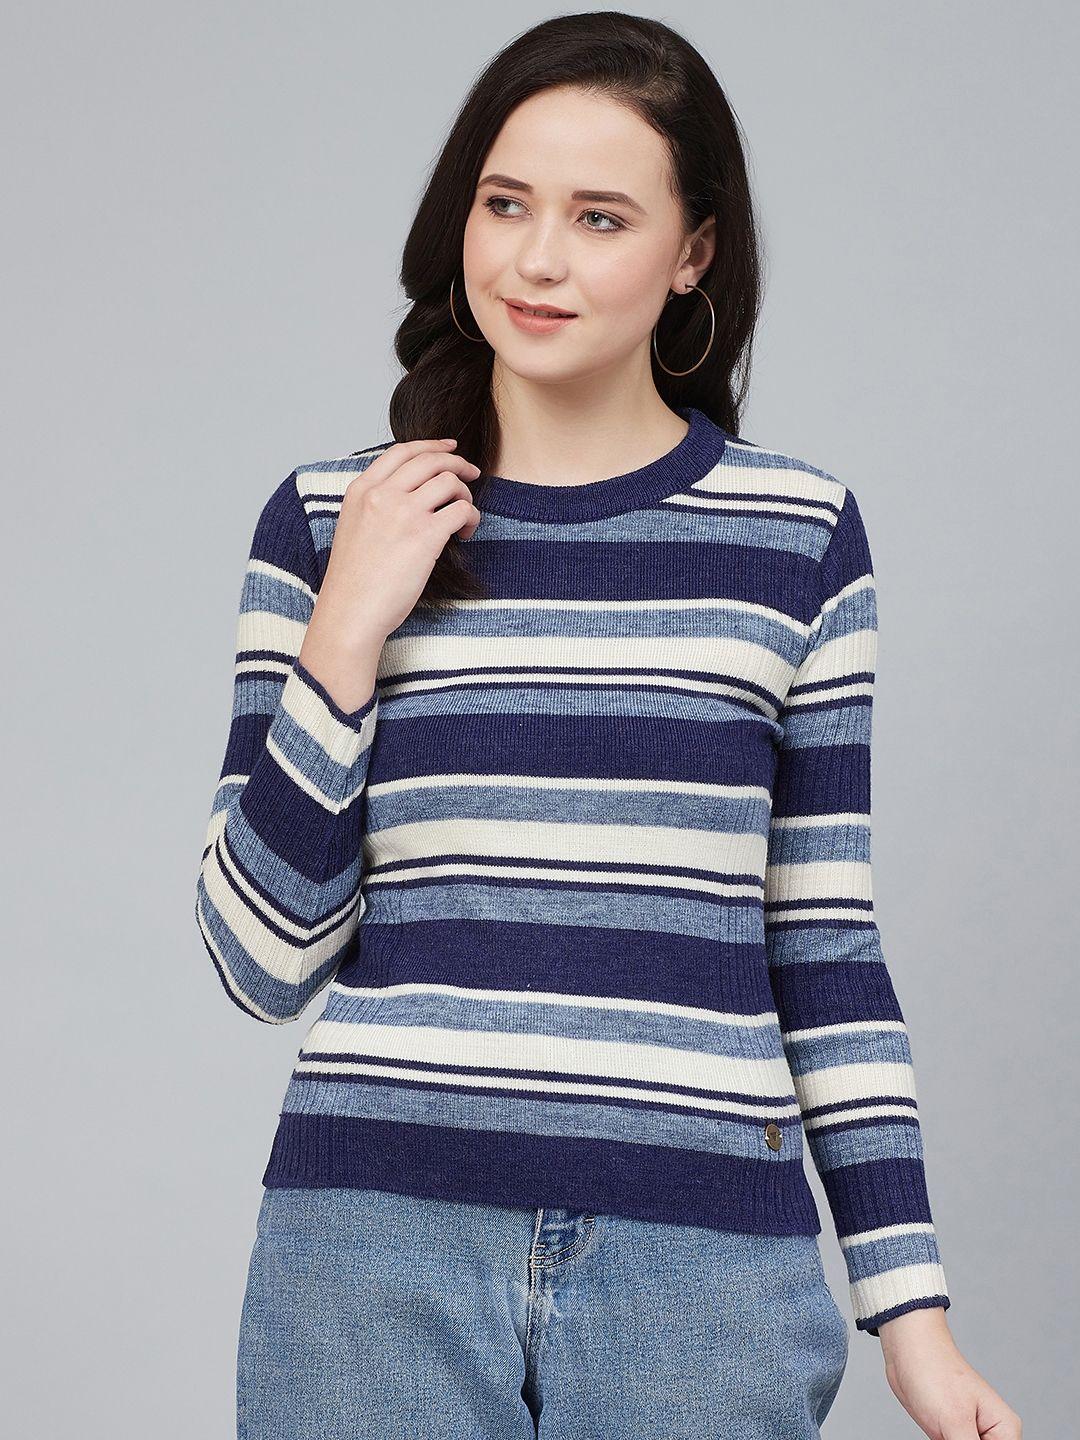 cayman-women-blue-&-white-striped-acrylic-pullover